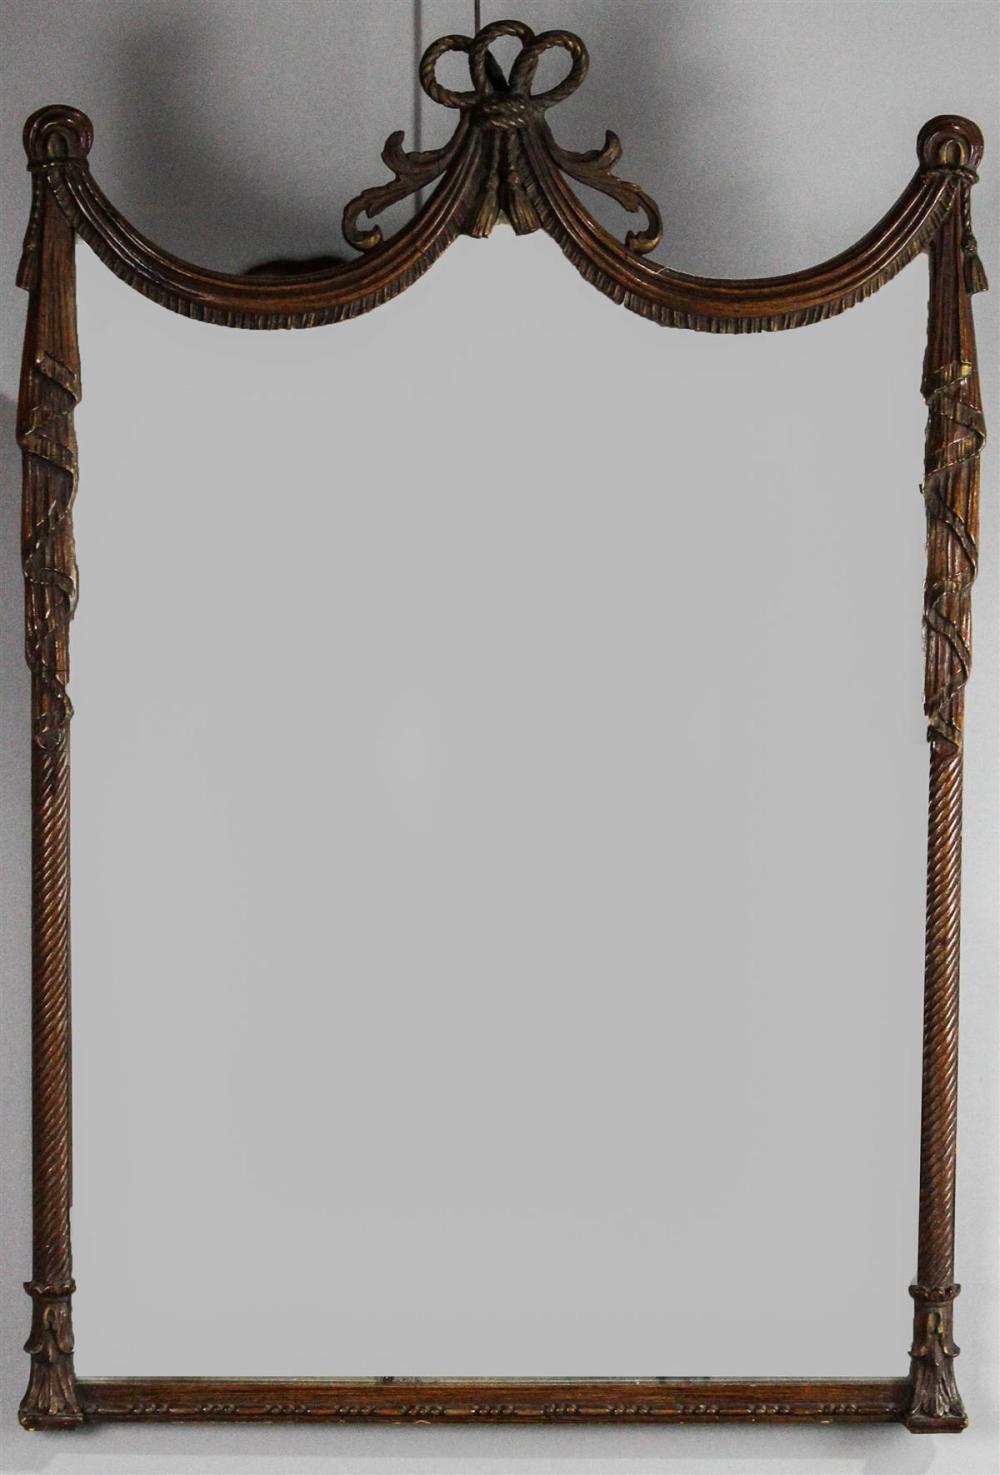 NEOCLASSICAL STYLE GILTWOOD MIRRORNEOCLASSICAL 313d1d